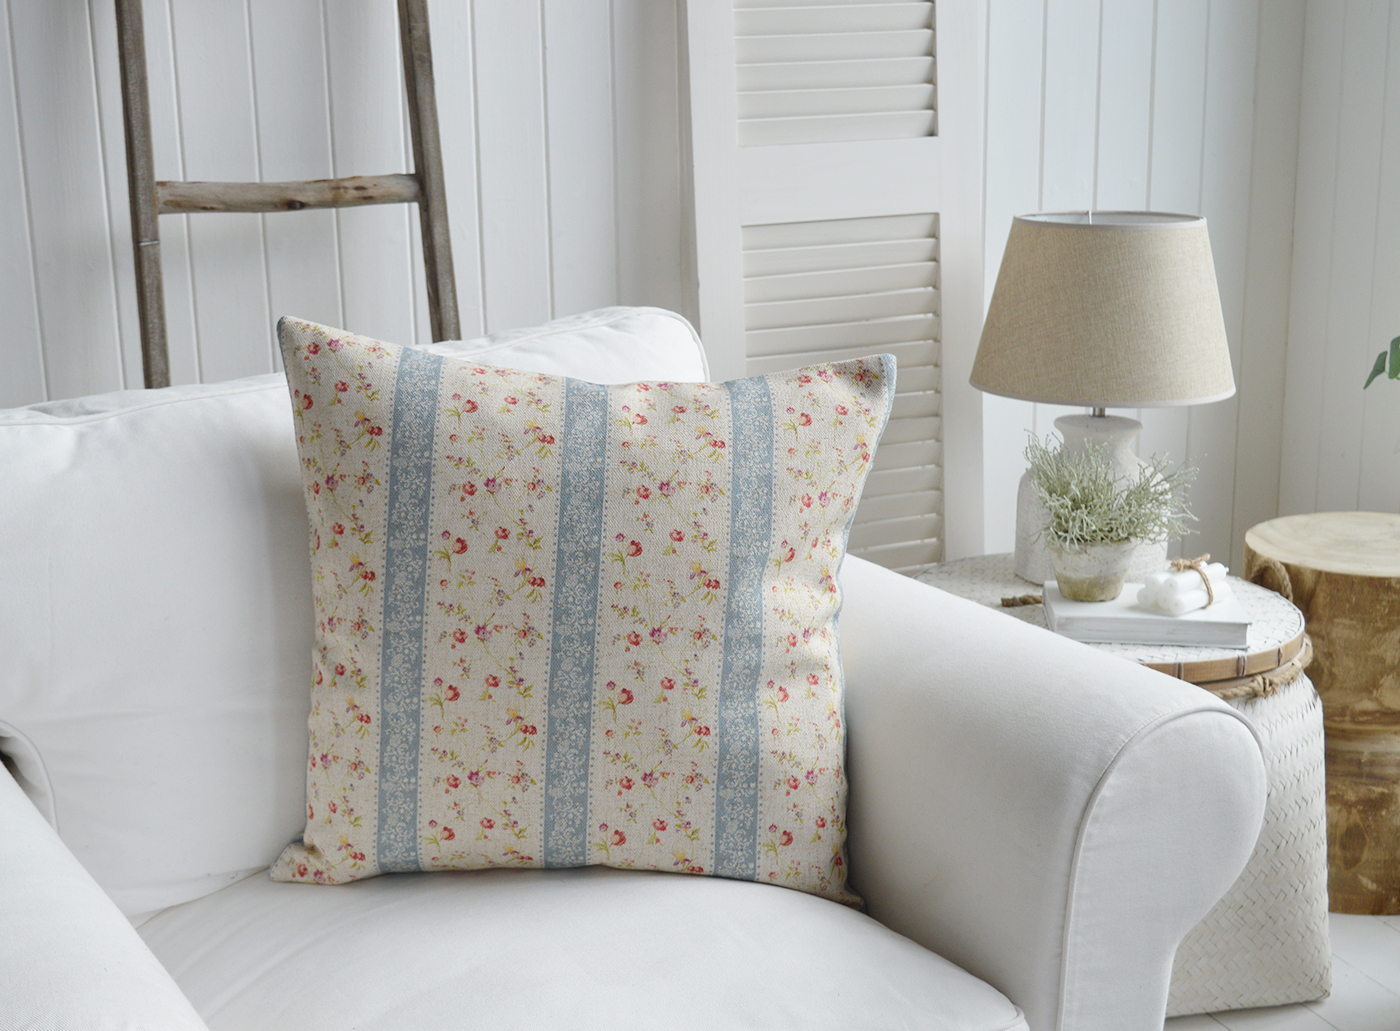 Vintage style New England cushion for coastal, modernfarmhouse and country homes and interiors